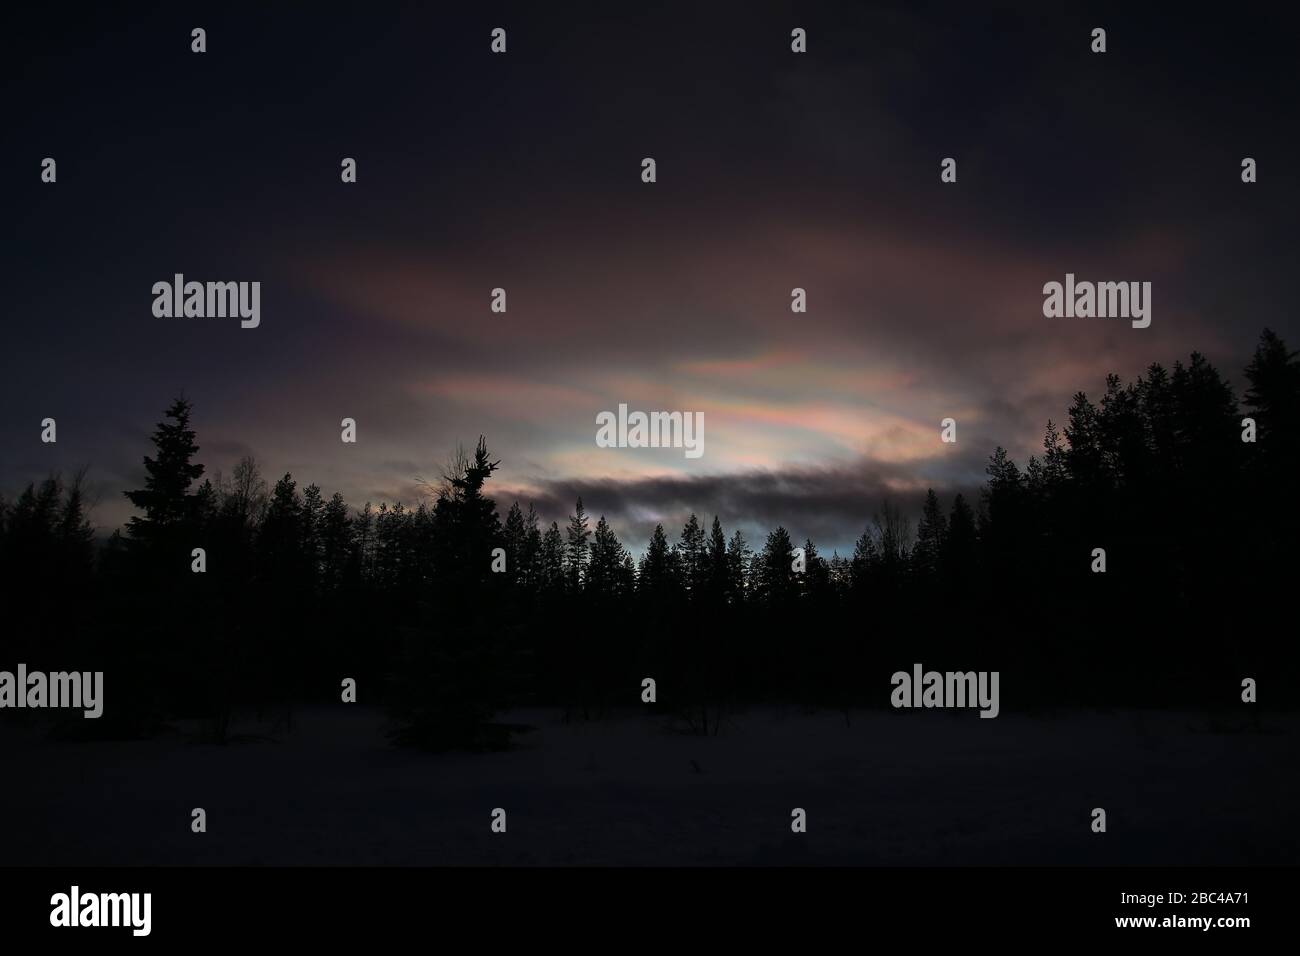 Nacreous and cumulus clouds in dusk over tree silhouettes. Stock Photo